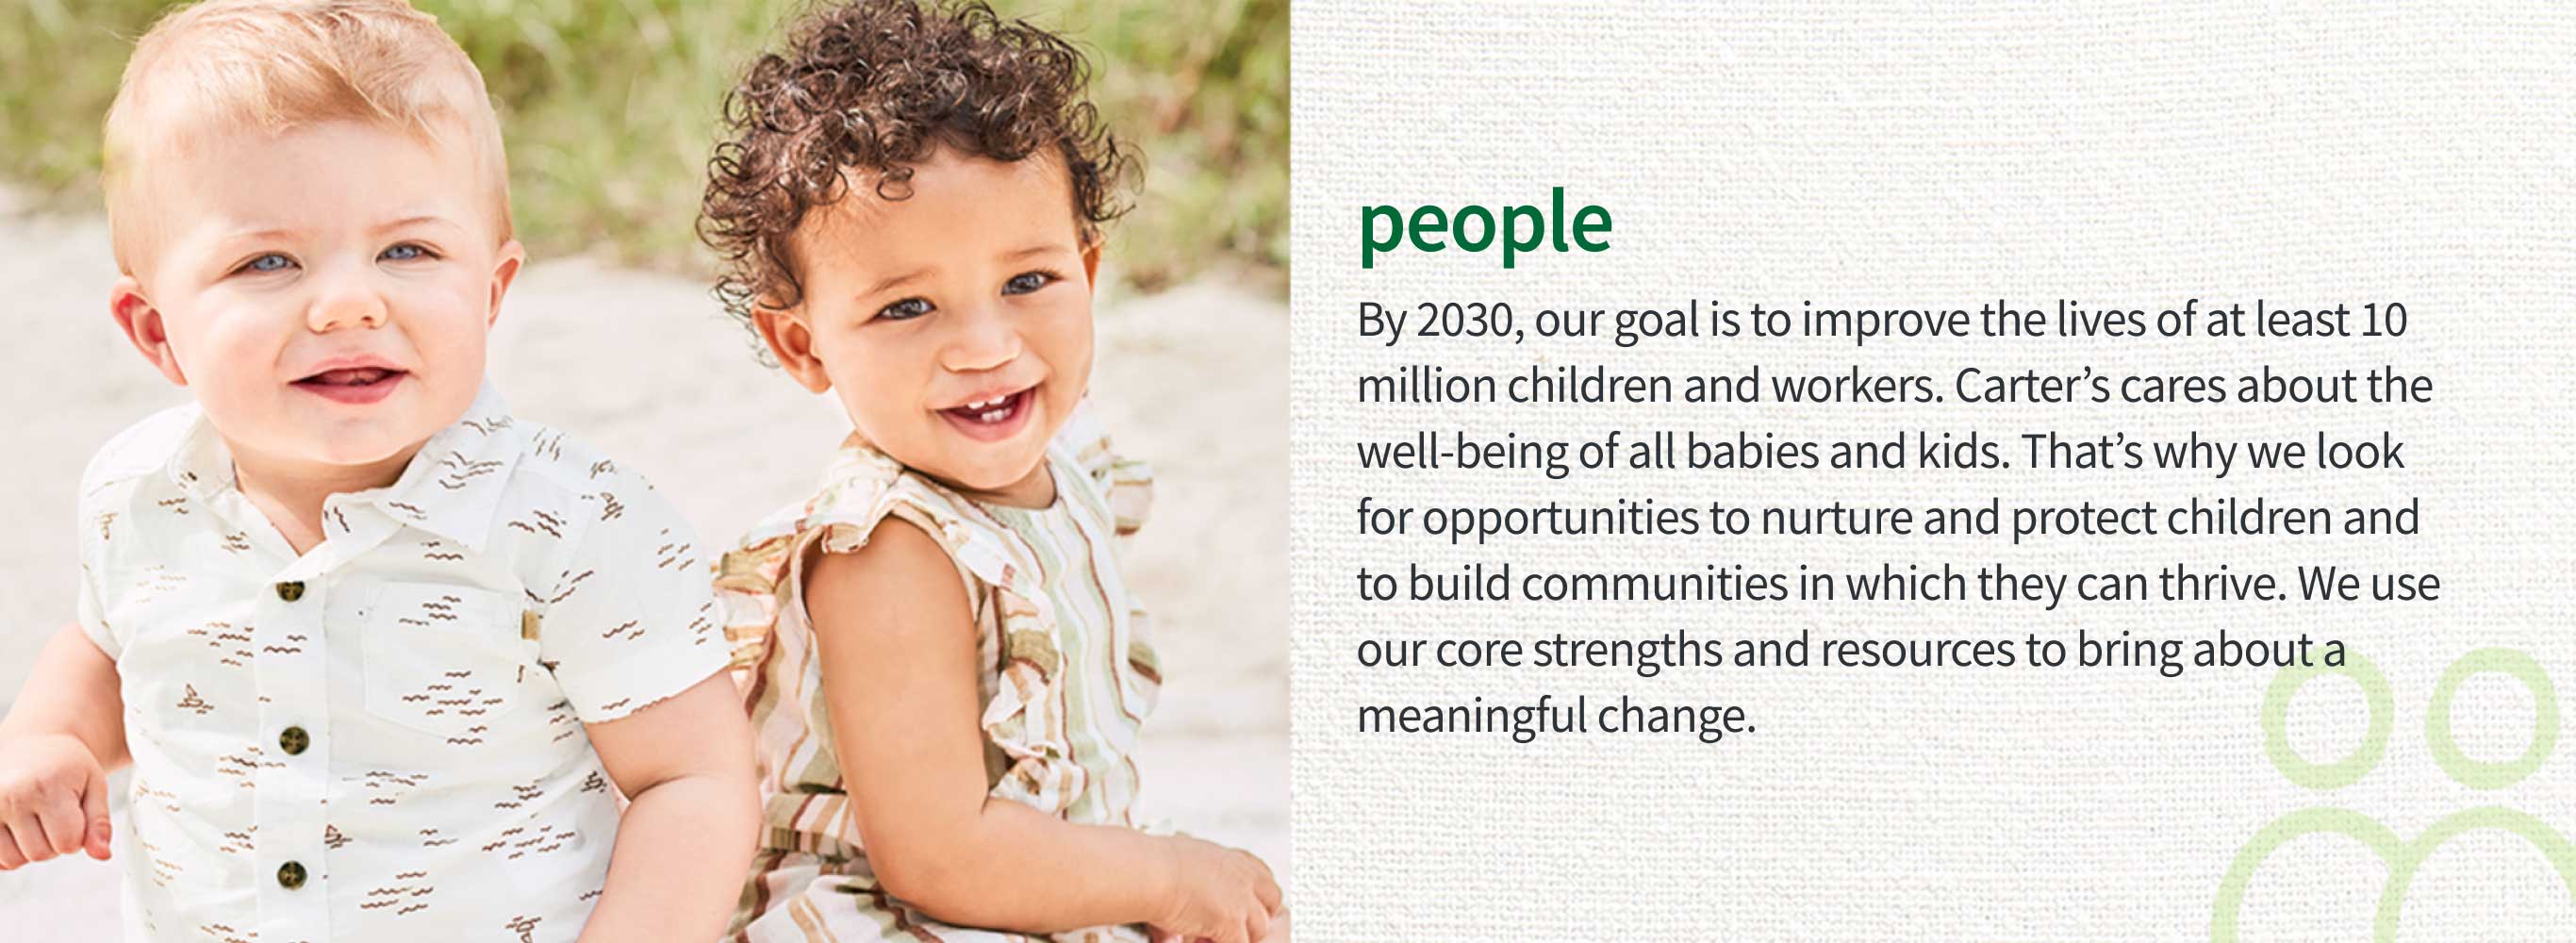 people | By 2030, our goal is to improve the lives of at least 10 million children and workers. Carter’s cares about the well-being of all babies and kids. That’s why we look for opportunities to nurture and protect children and to build communities in which they can thrive. We use our core strengths and resources to bring about a meaningful change.